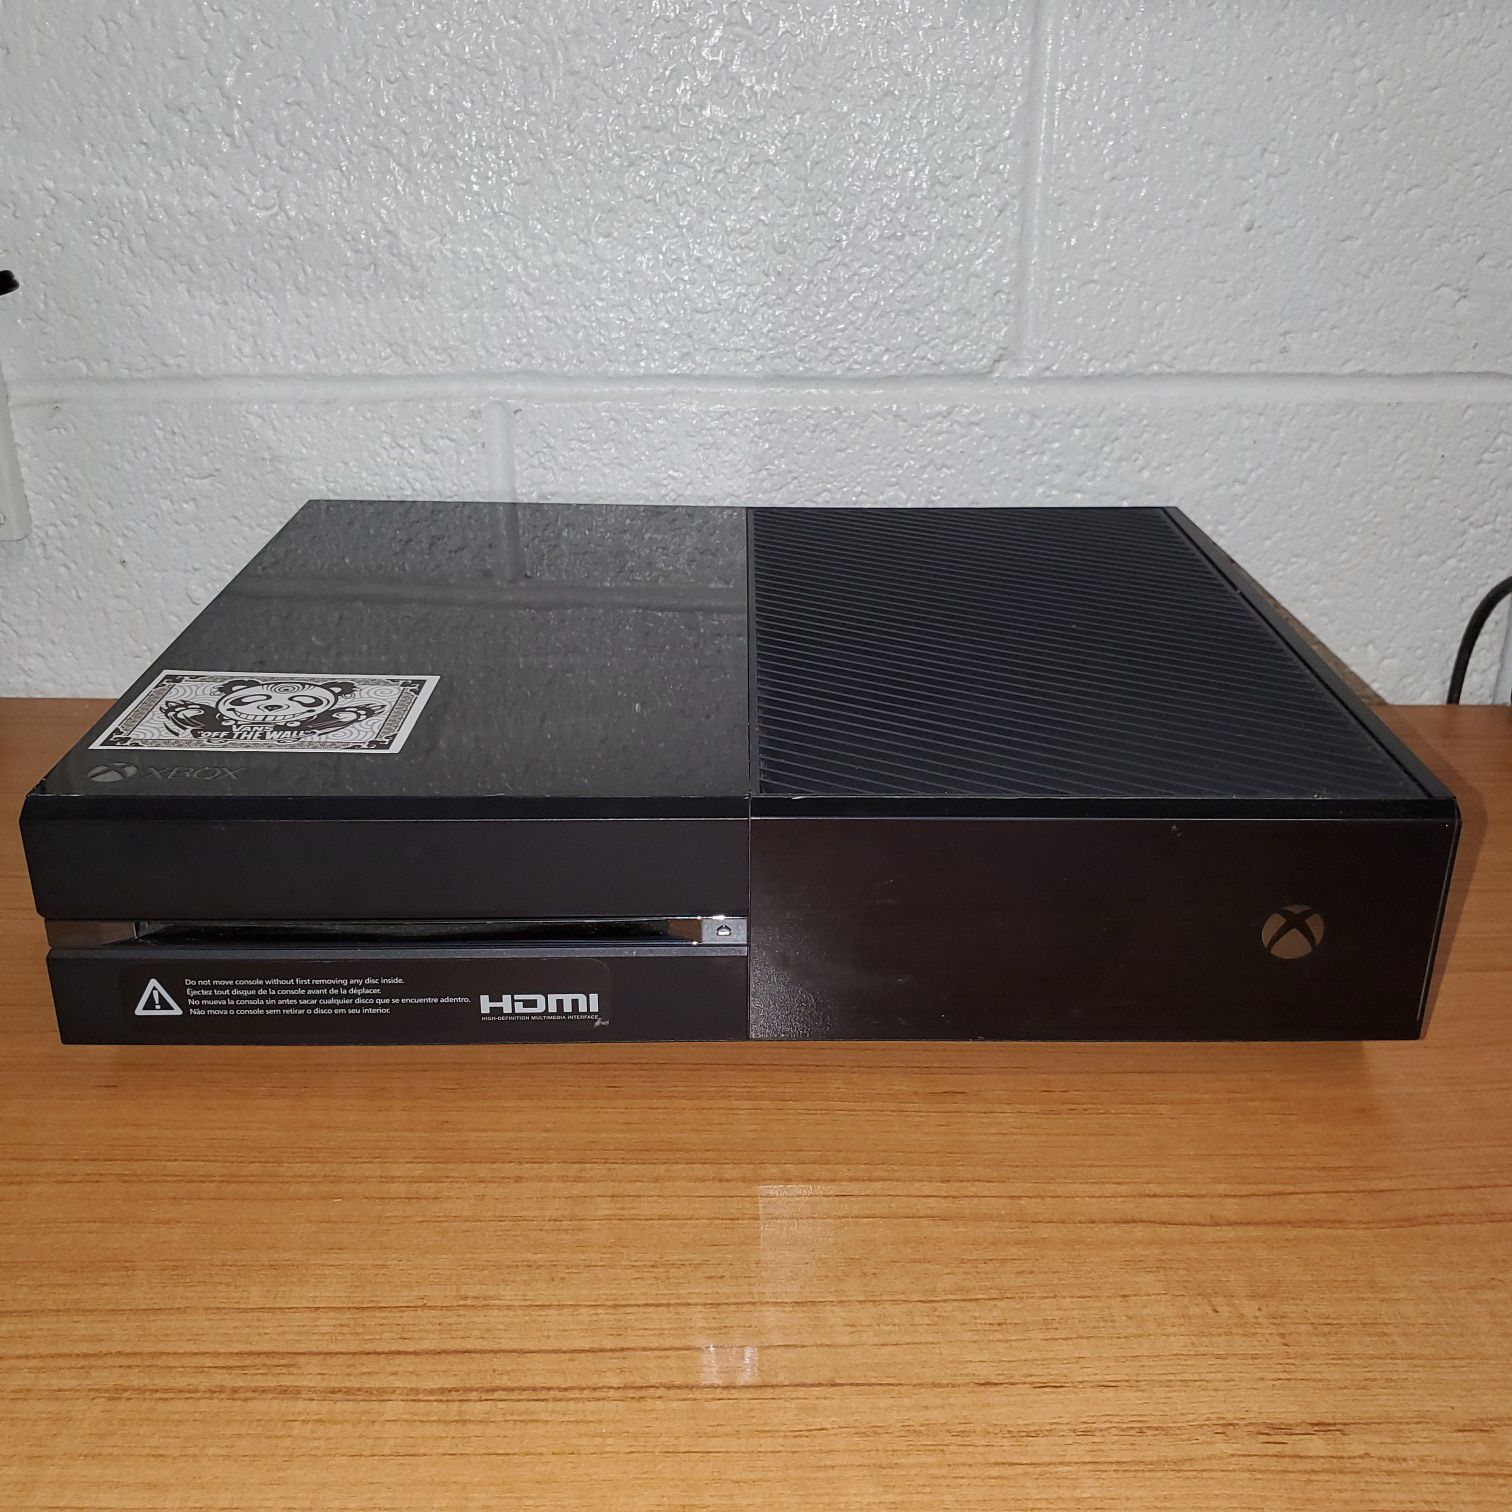 Xbox One w/ controller & games